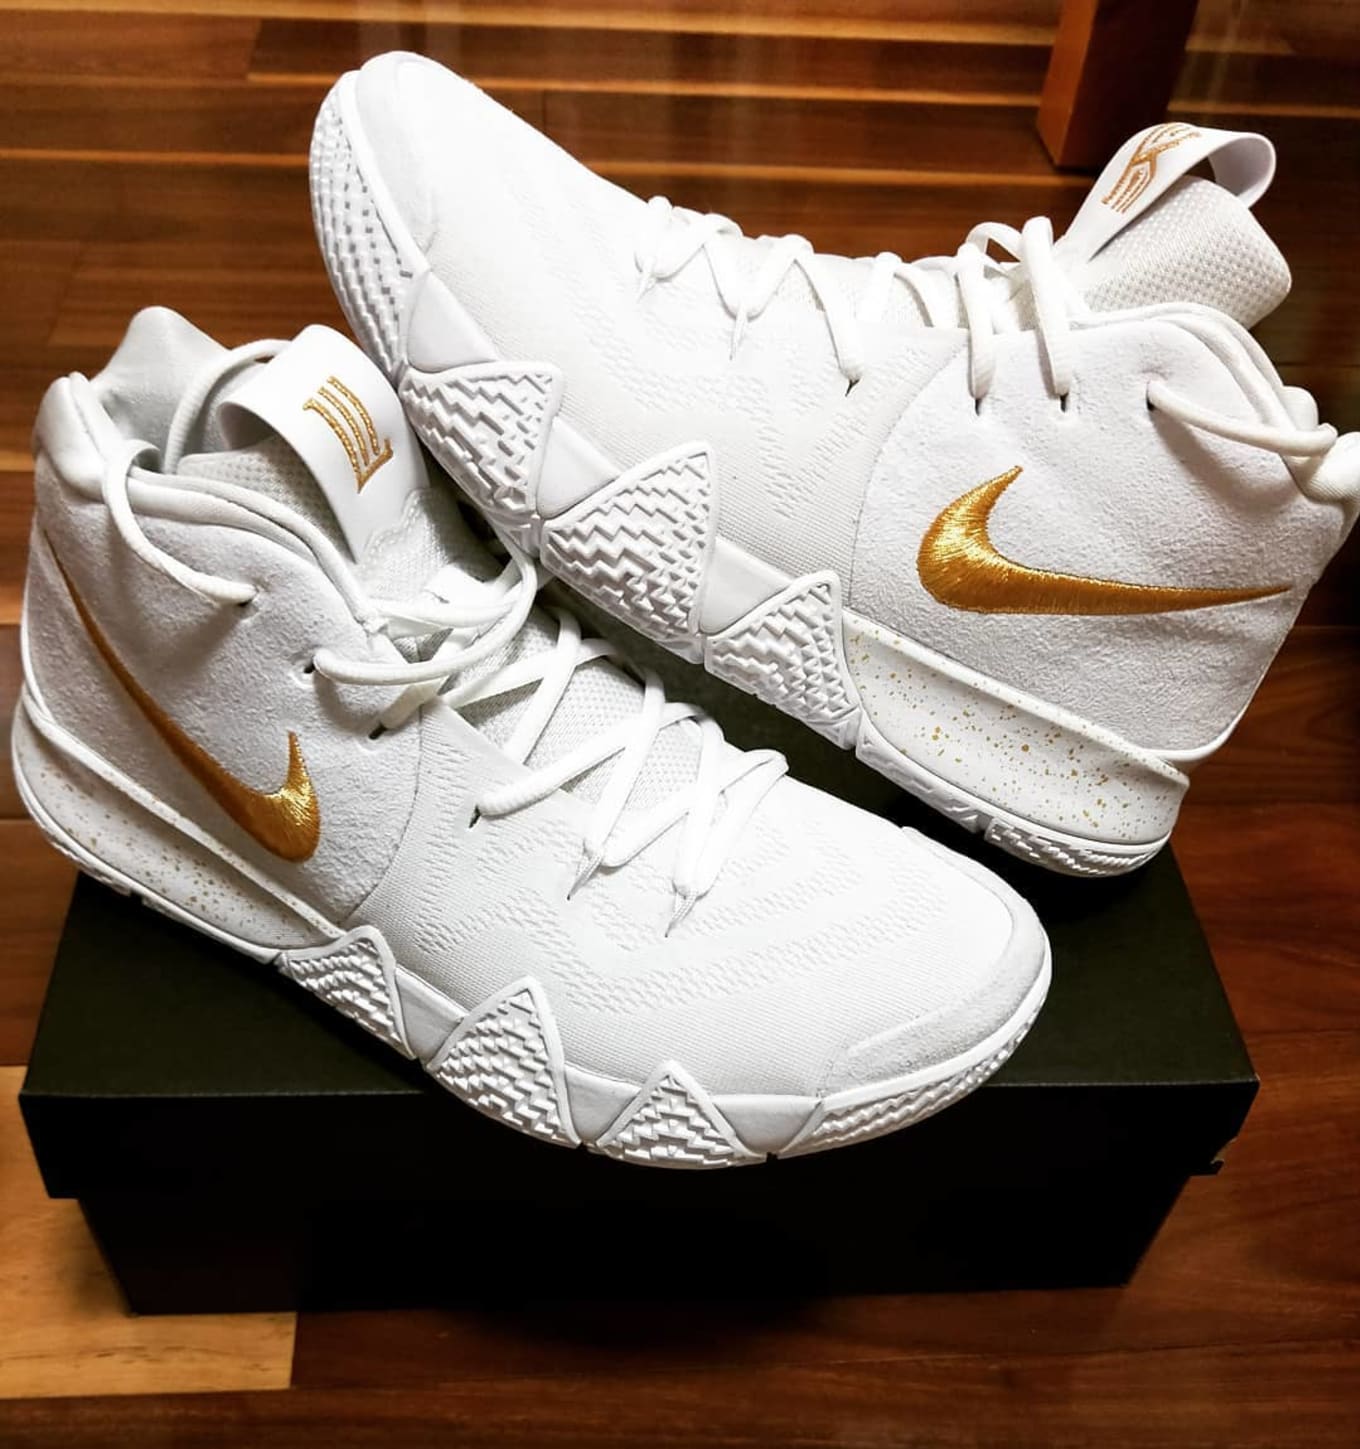 kyrie 4s white and gold online